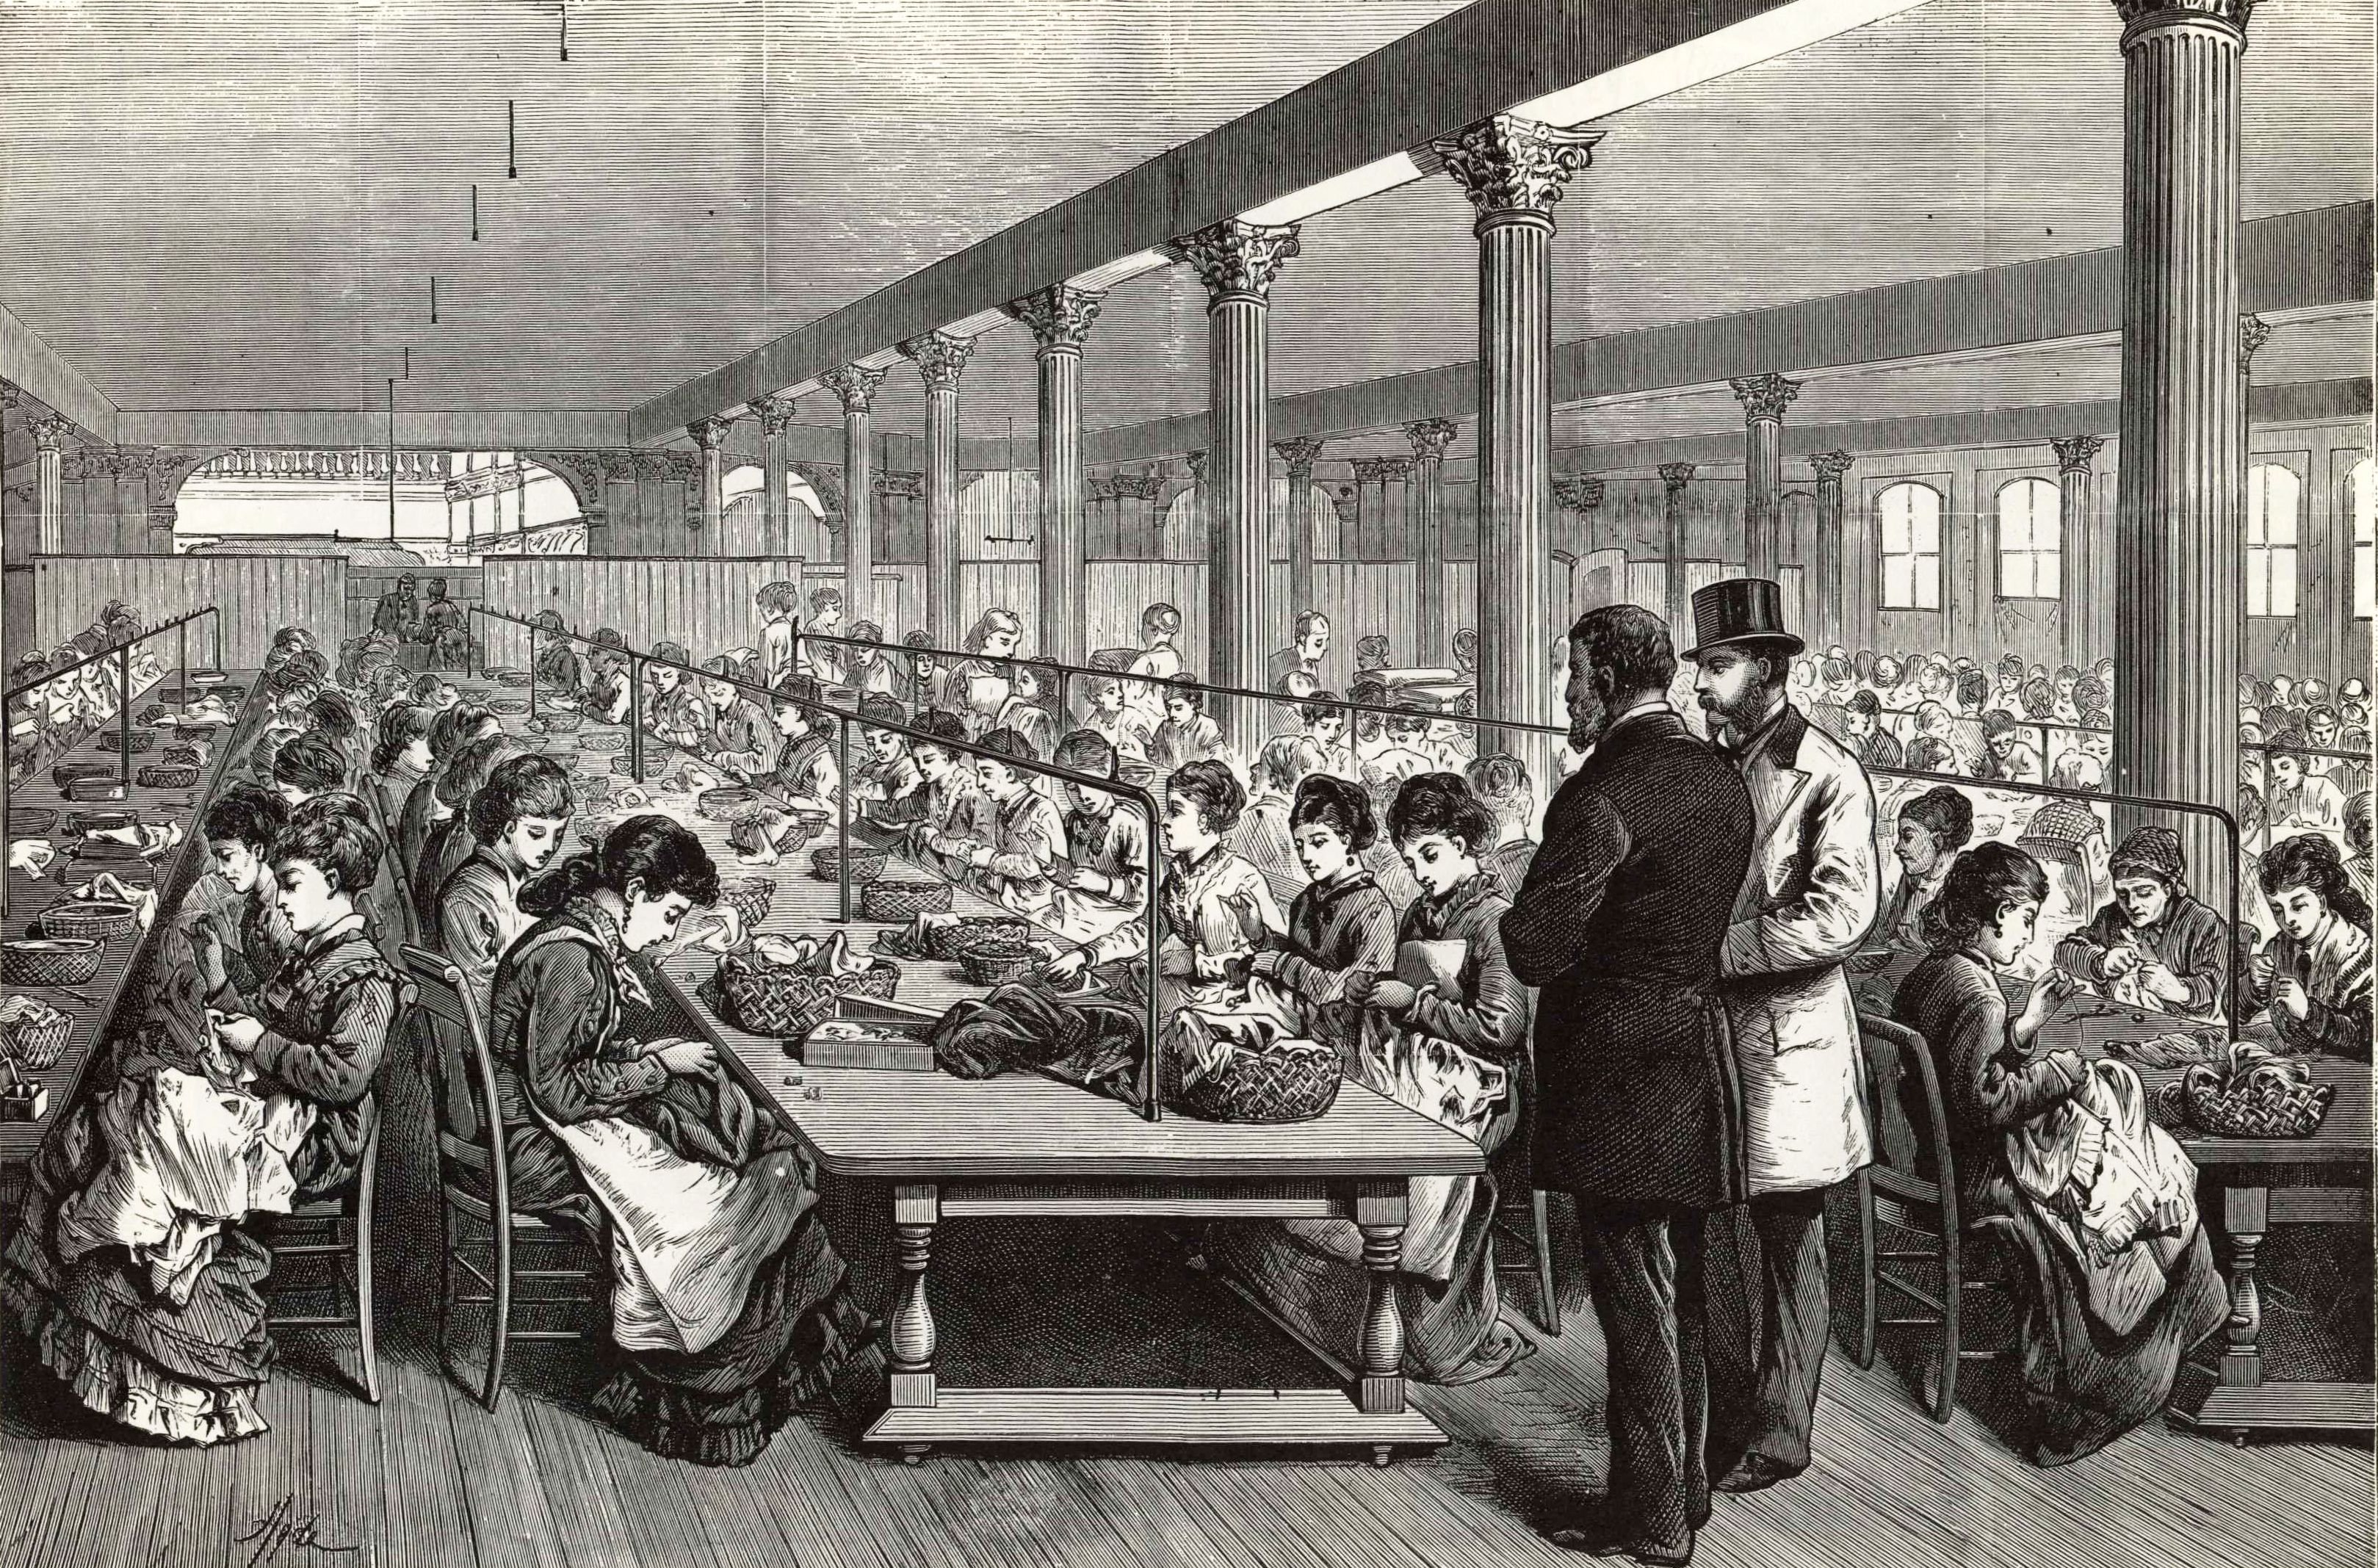 The sewing room of A.T. Stewart's in 1875